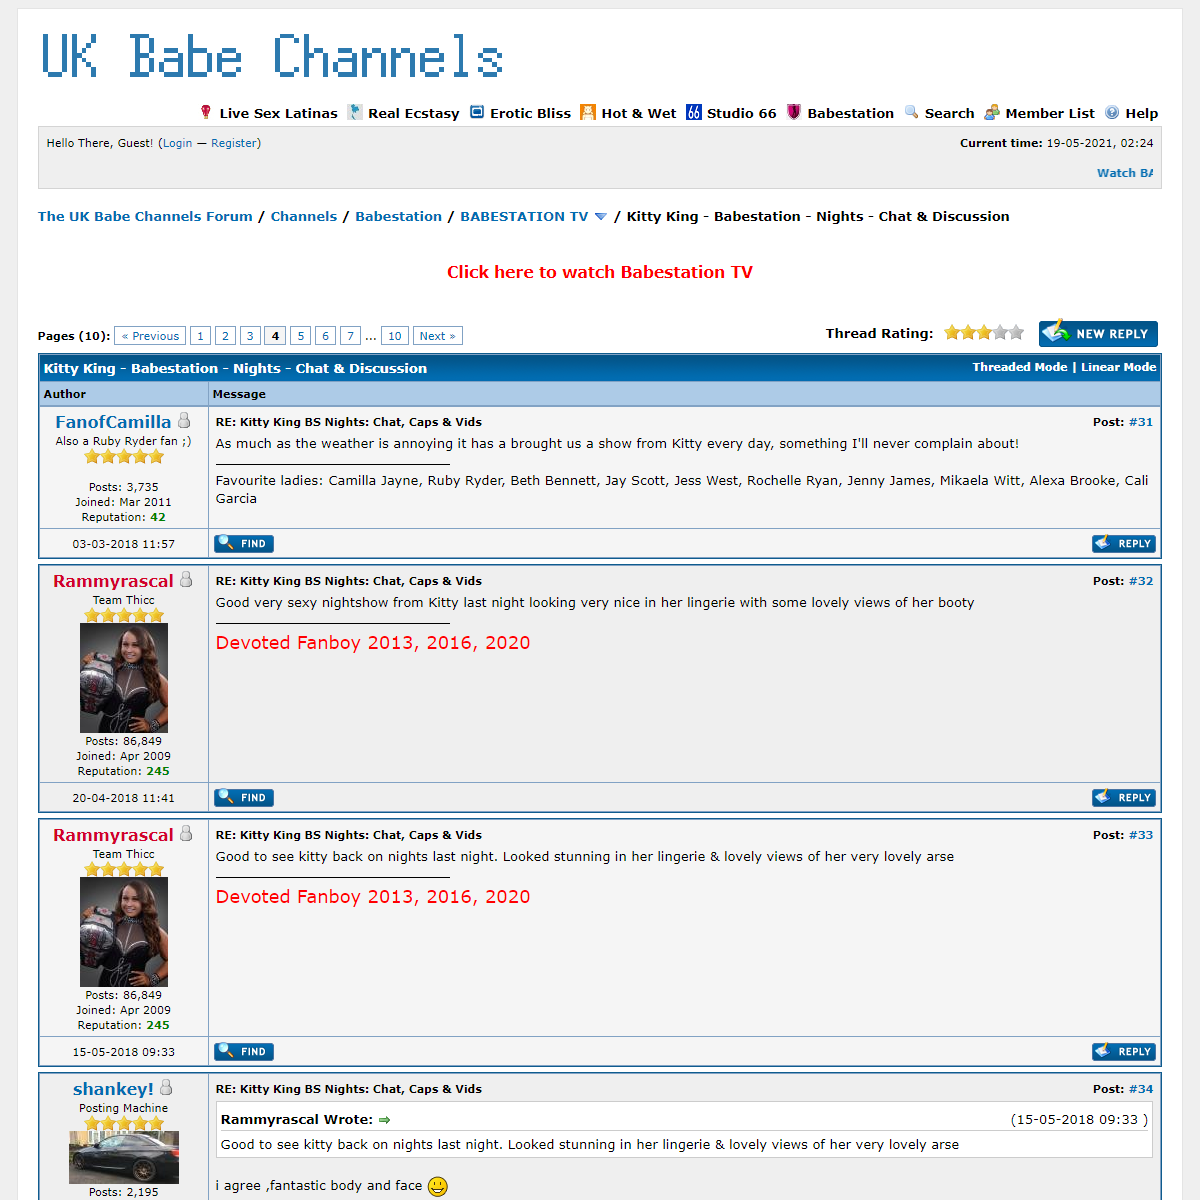 A complete backup of https://babeshows.co.uk/showthread.php?tid=71999&page=4